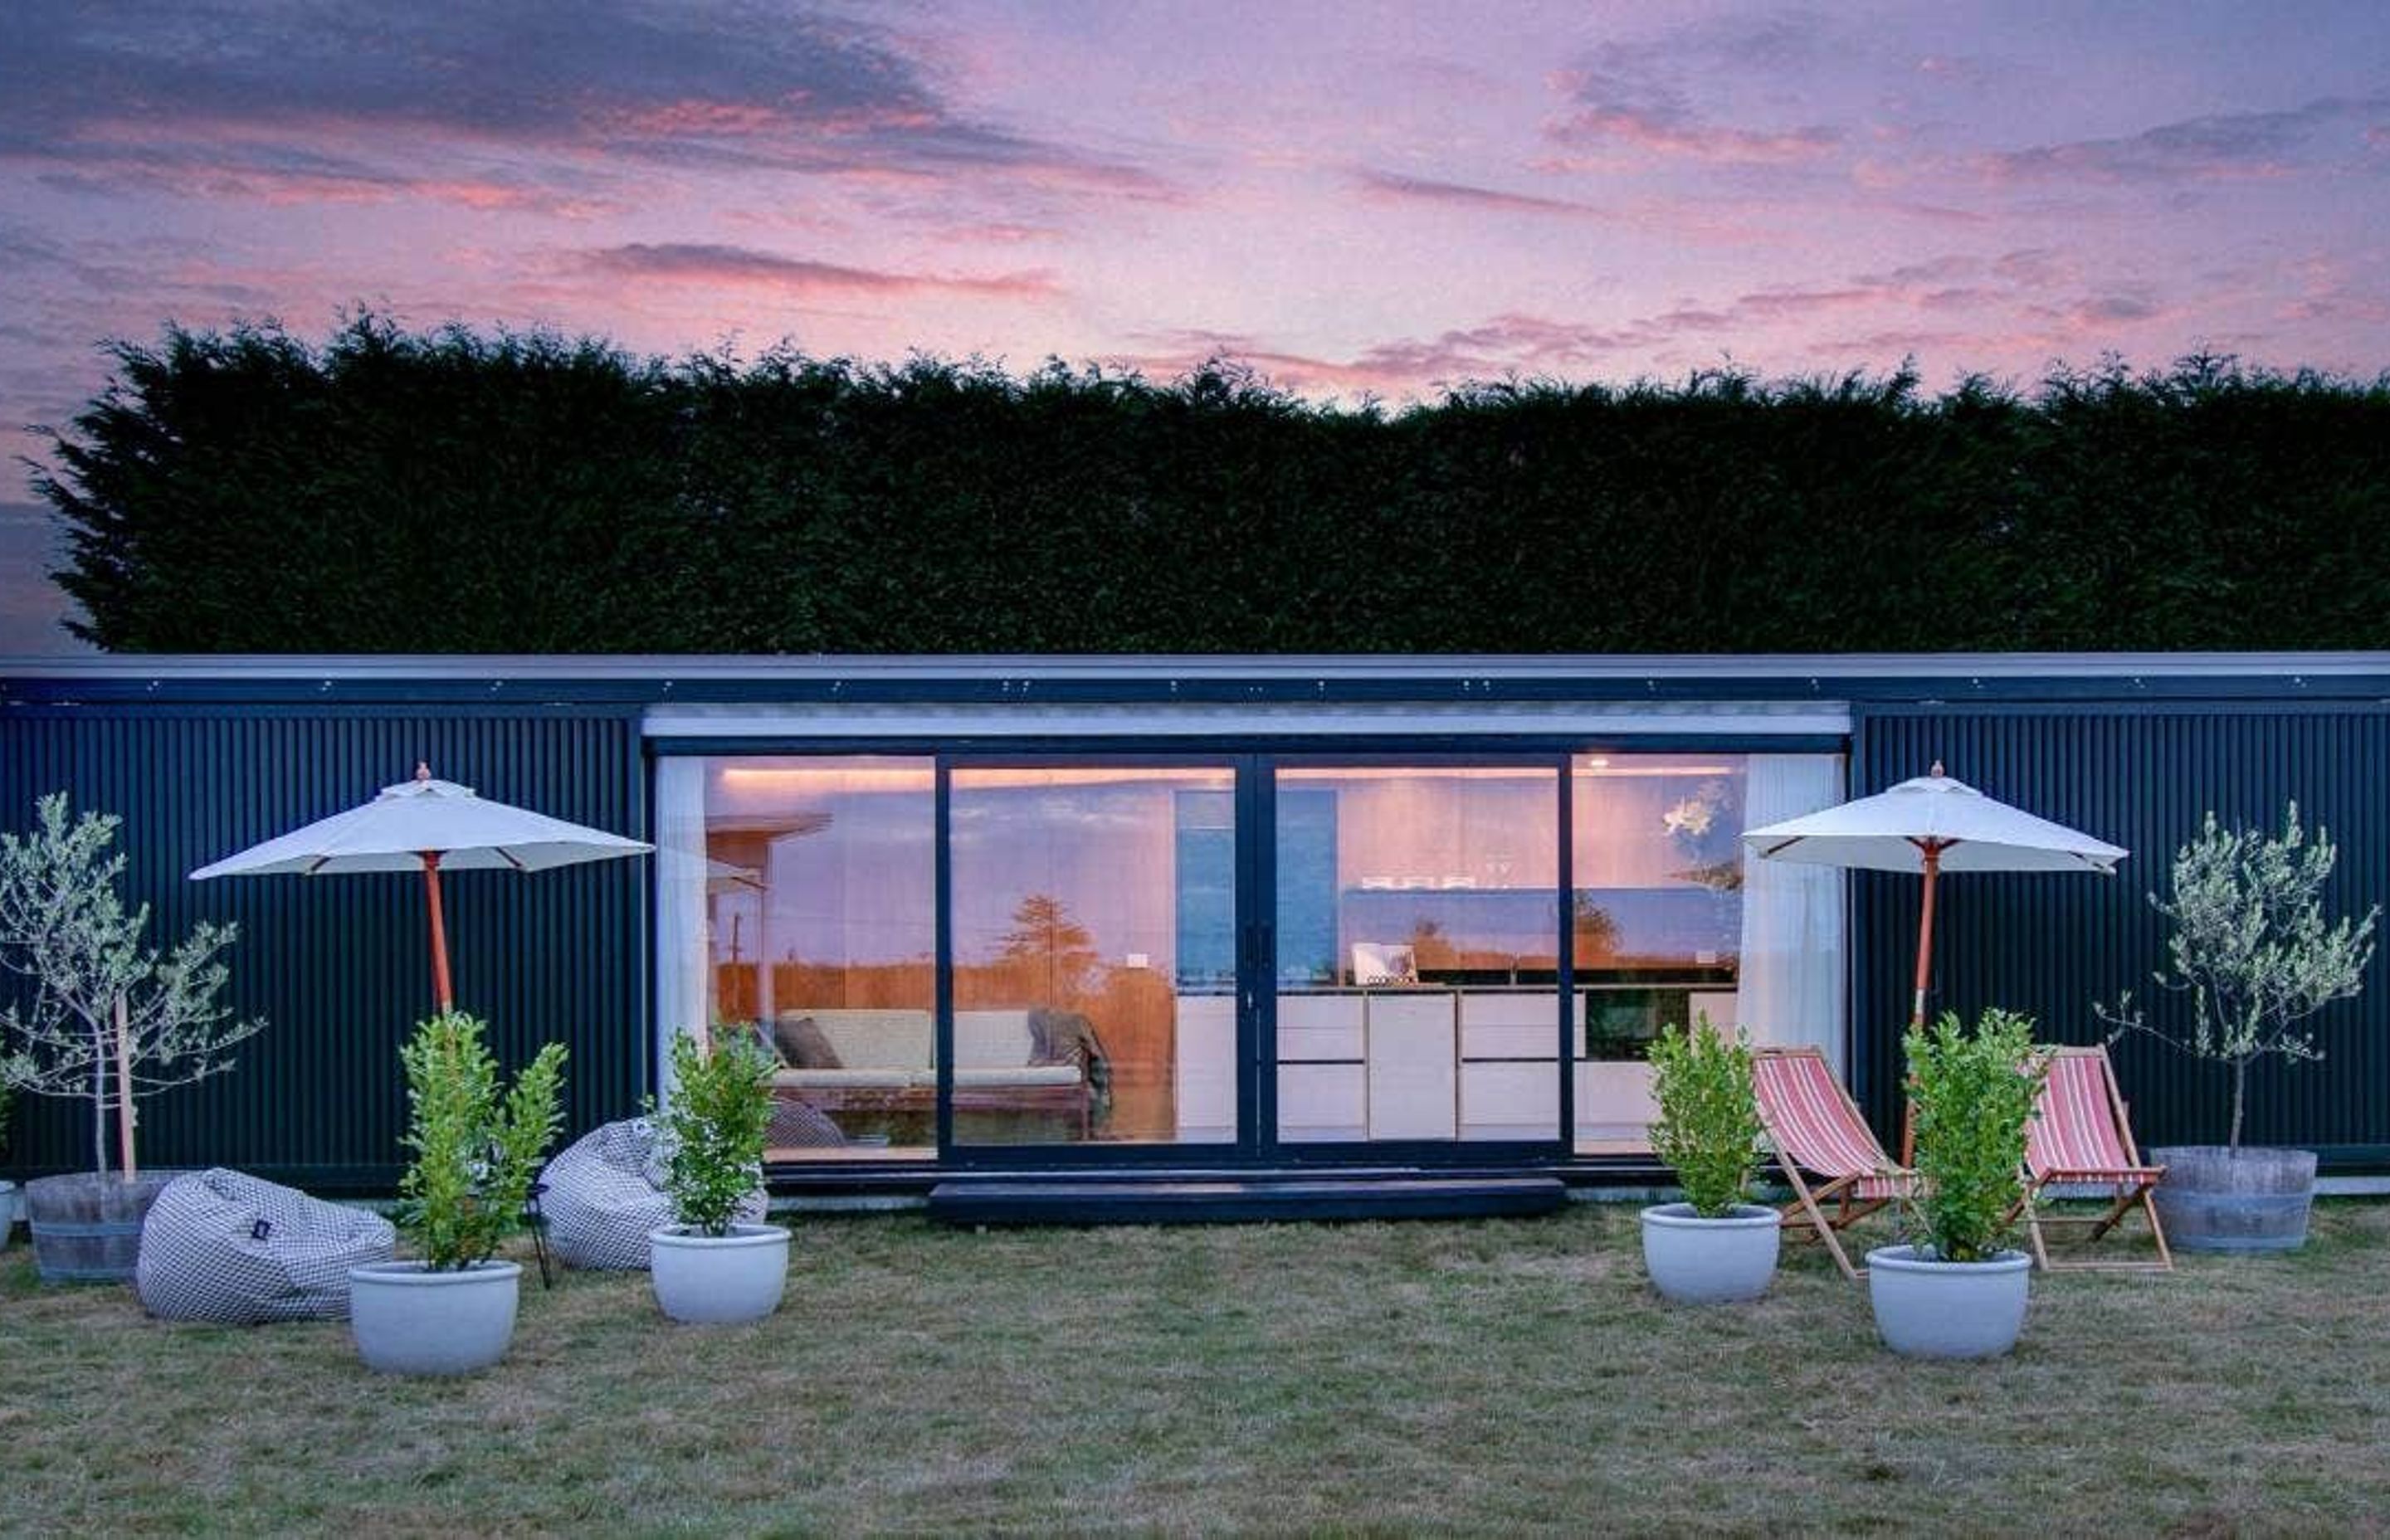 Picture Courtesy of Stuff (2019, 13 Feb) https://www.stuff.co.nz/life-style/homed/latest/110555556/open-homes-for-tiny-container-house-with-auction-proceeds-going-to-charity